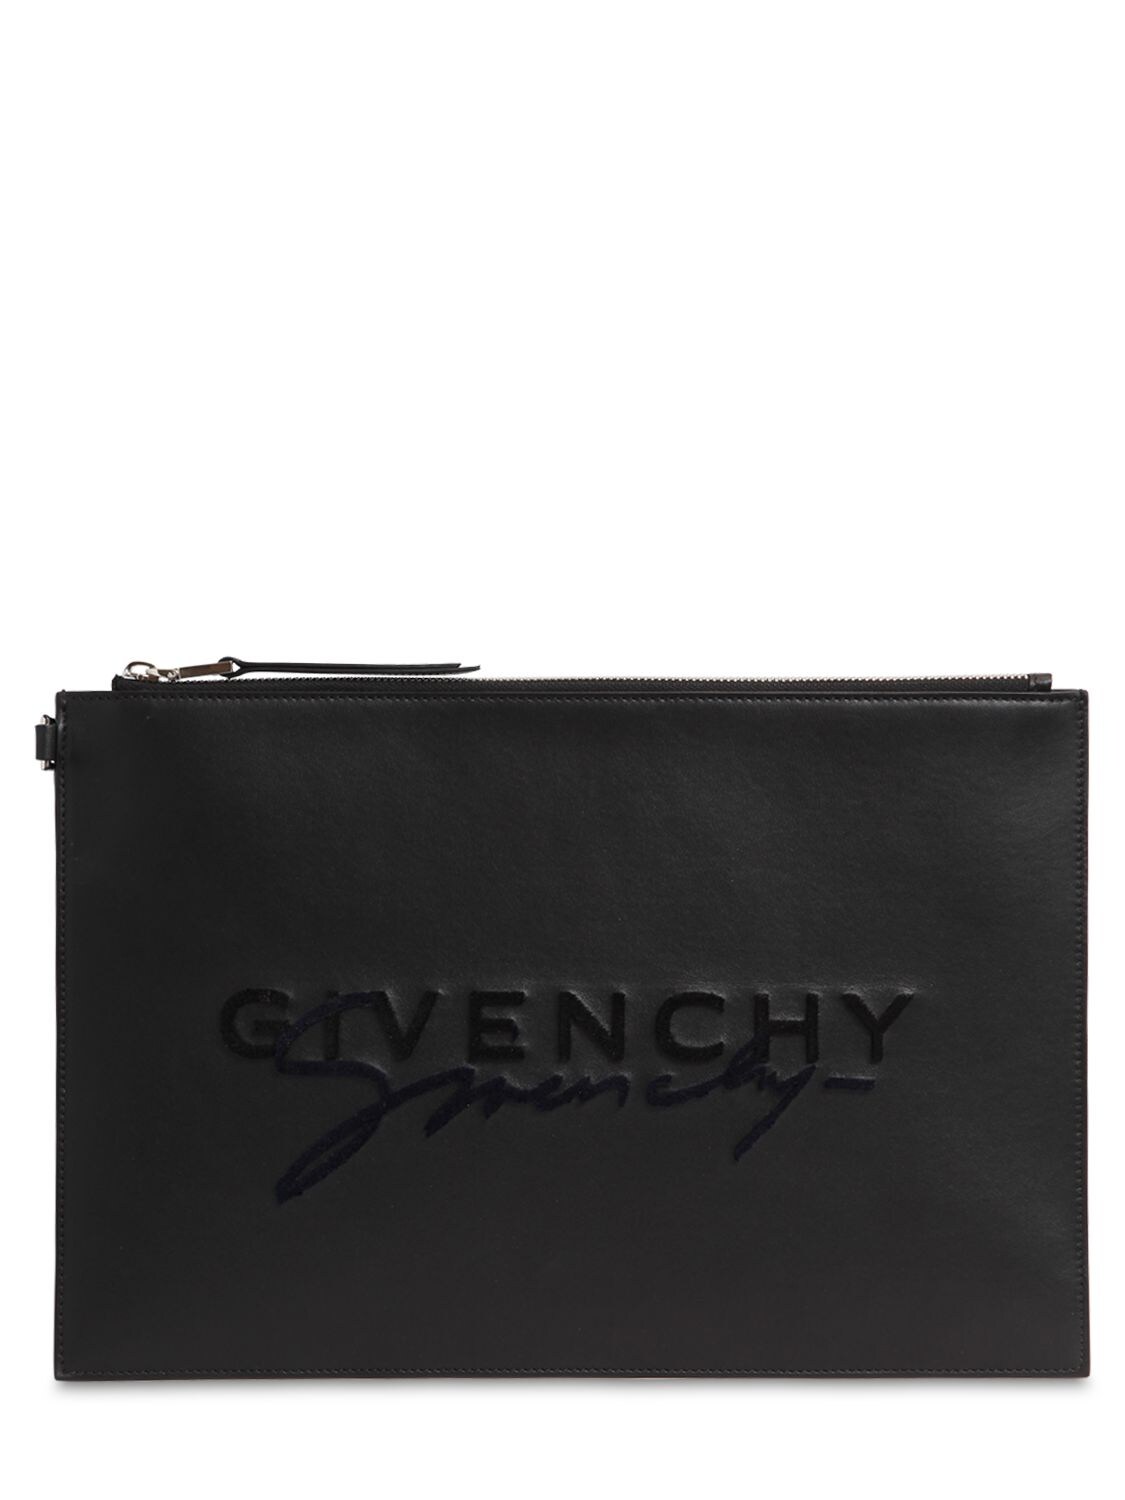 Givenchy Large Flocked Logo Leather Pouch In Black